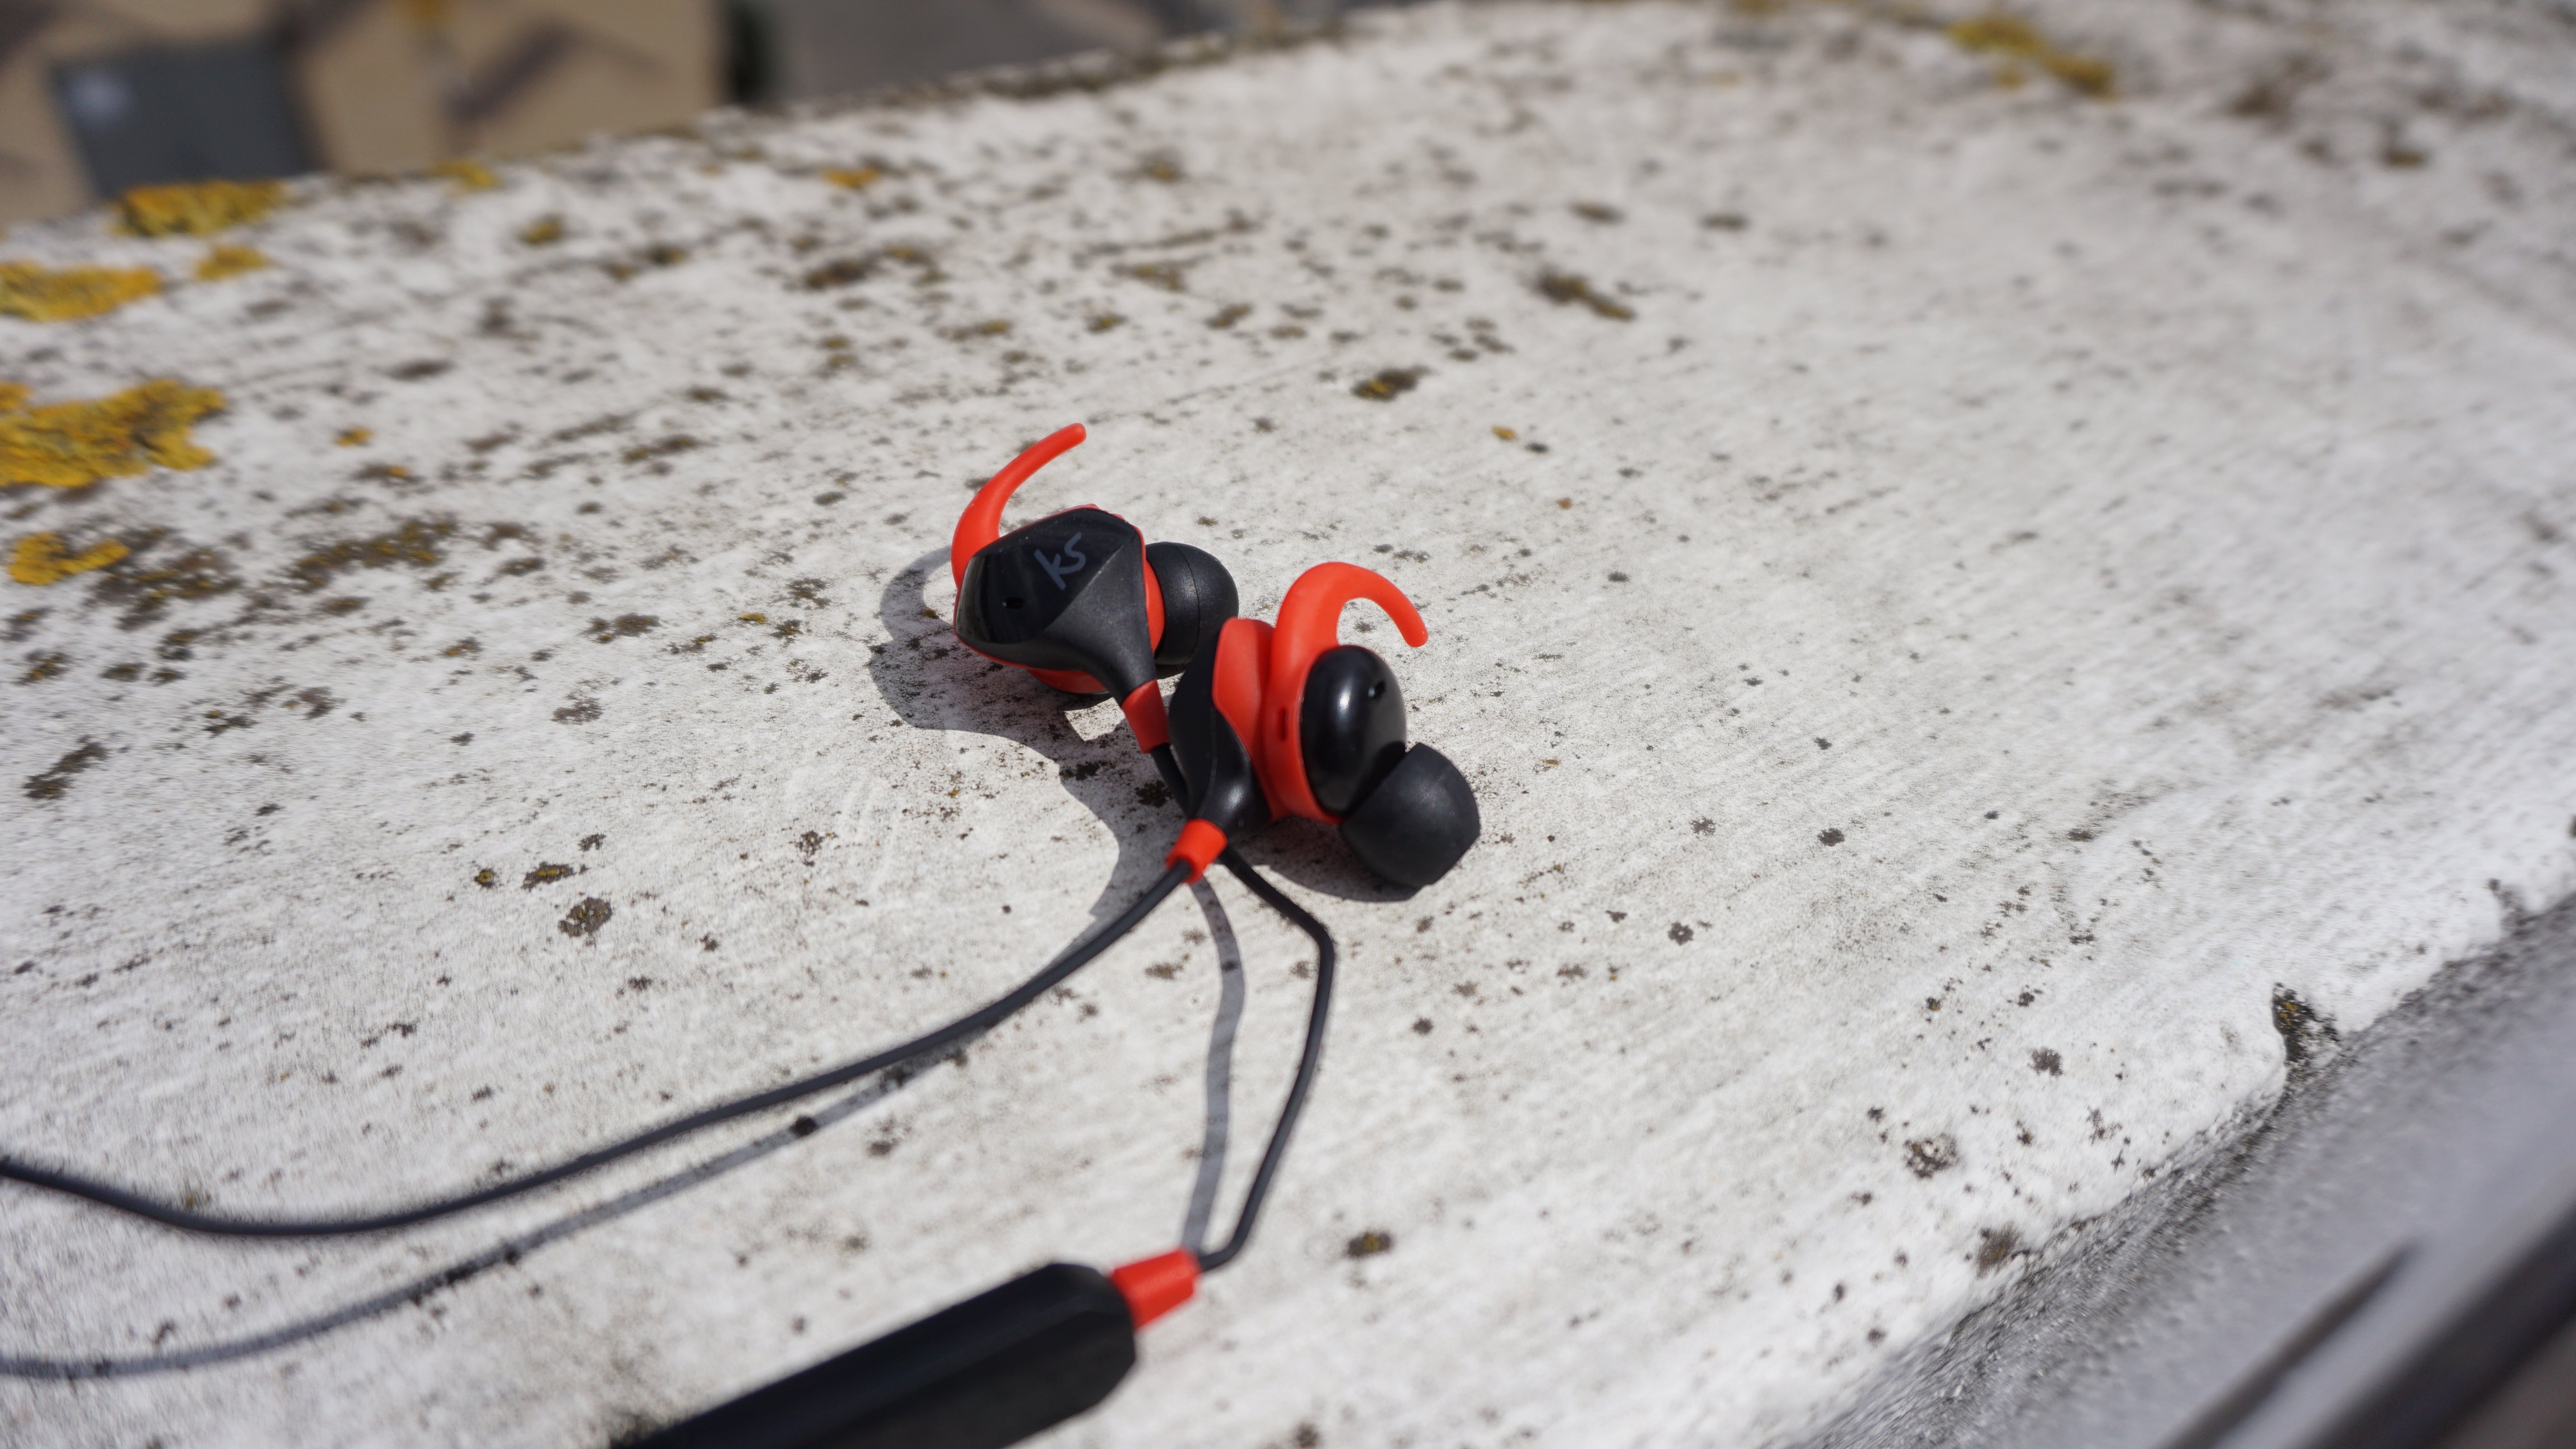 KitSound Immerse Active earphones on concrete surface.